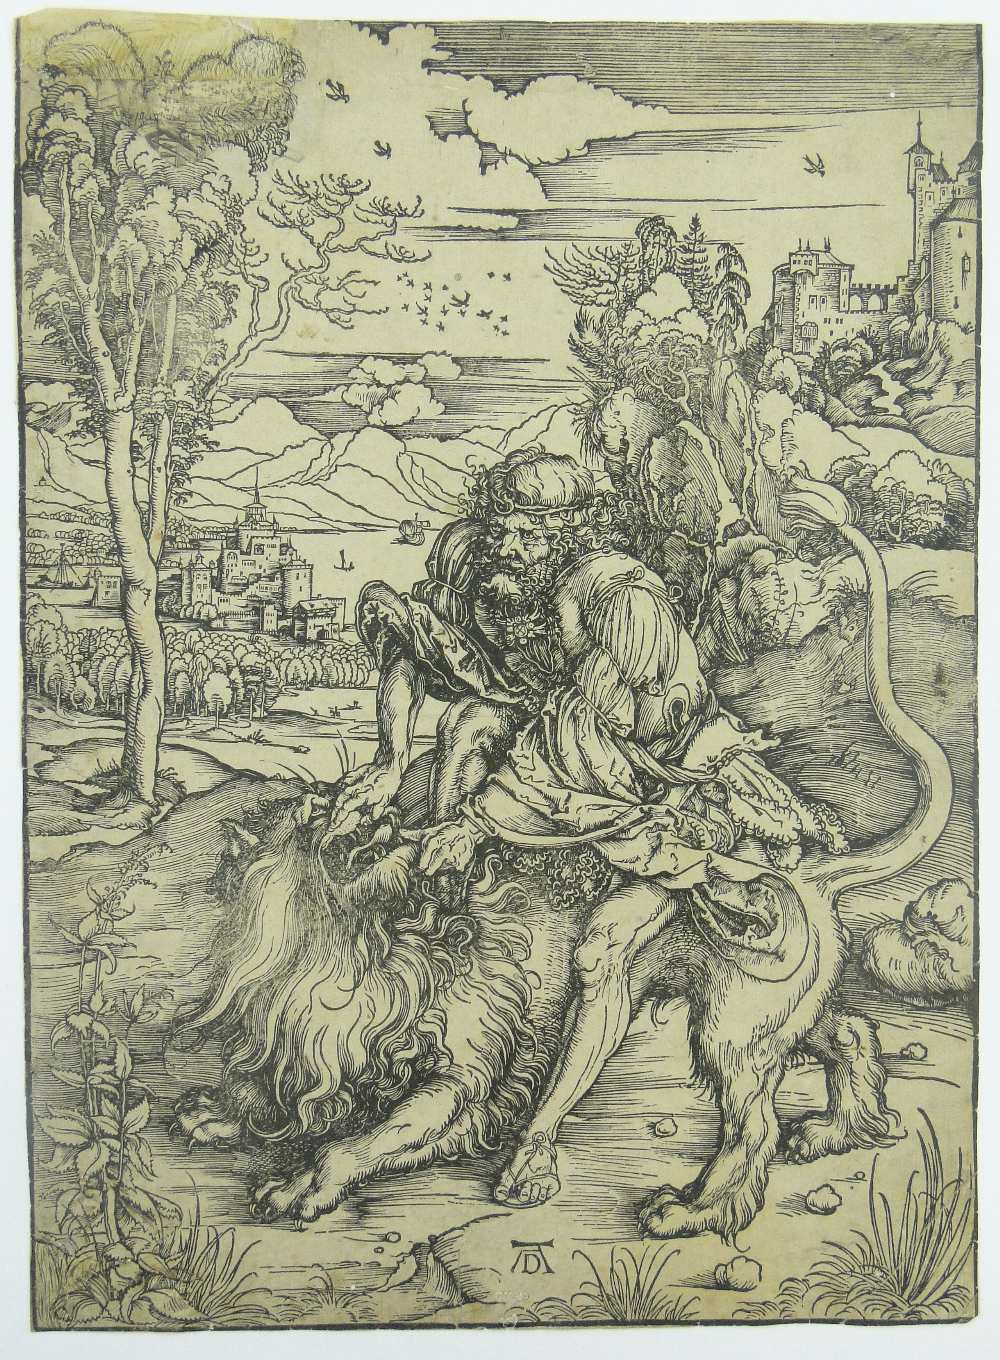 Albrecht Durer (1471-1528)
Old Master woodcut print, Samson and the lion, early collection stamps